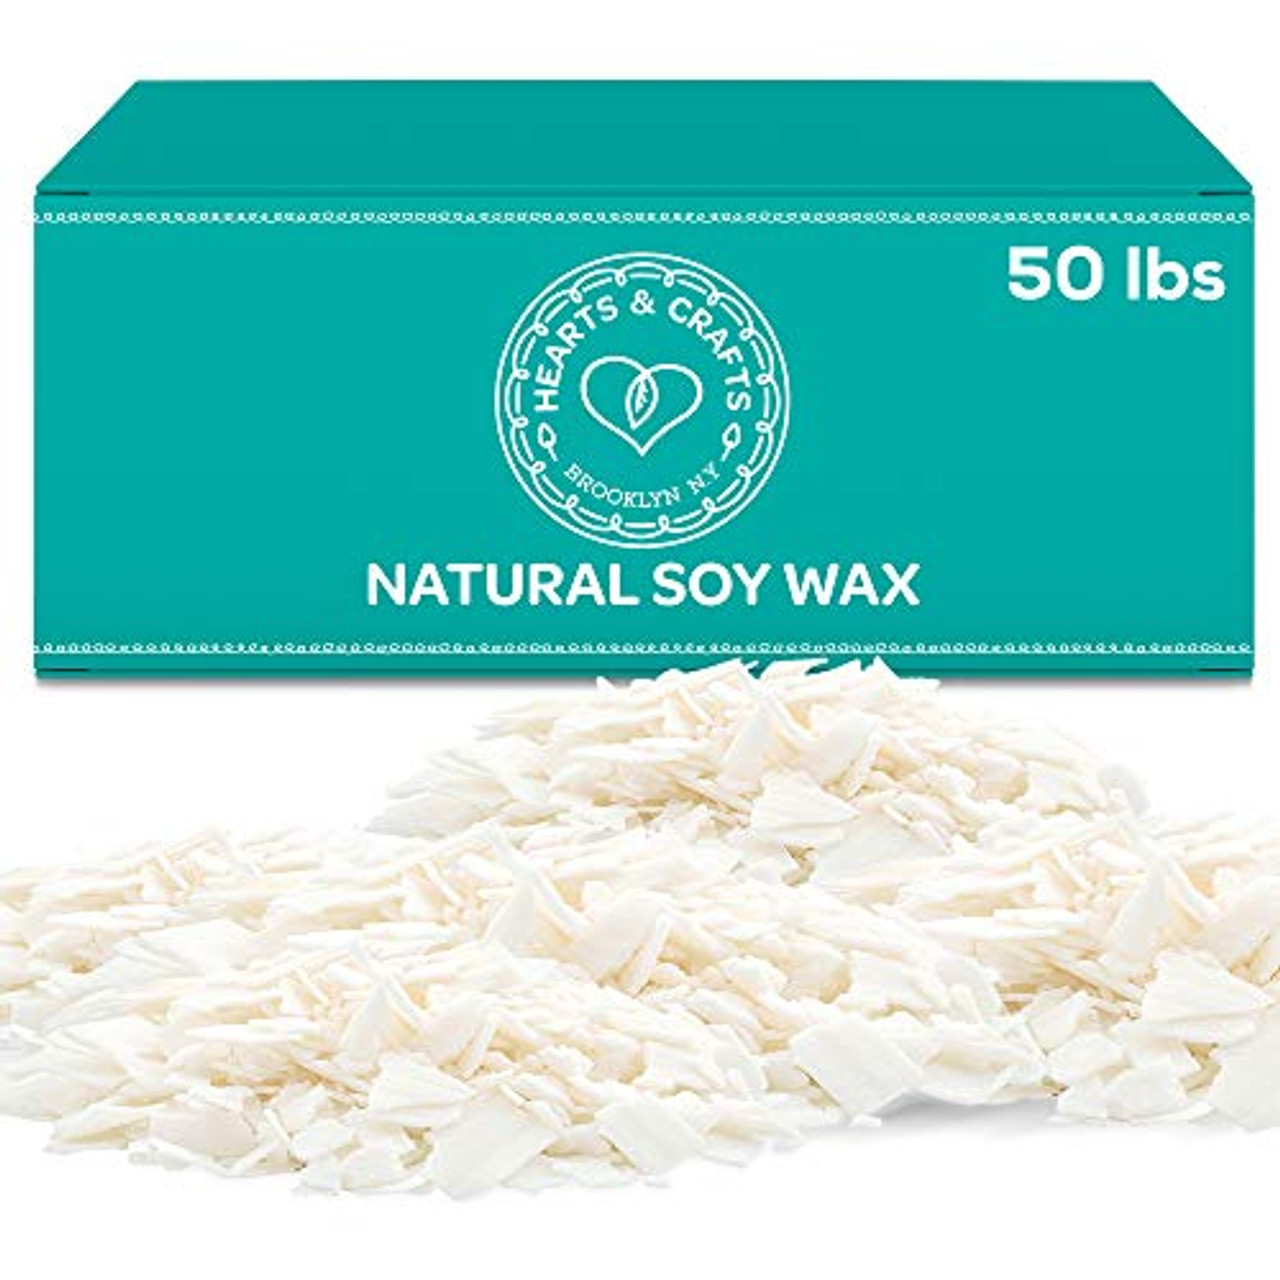 Hearts and Crafts Soy Wax and DIY Candle Making Supplies | 10lb Bag with 100 6-Inch Pre-Waxed Wicks, 2 Centering Devices